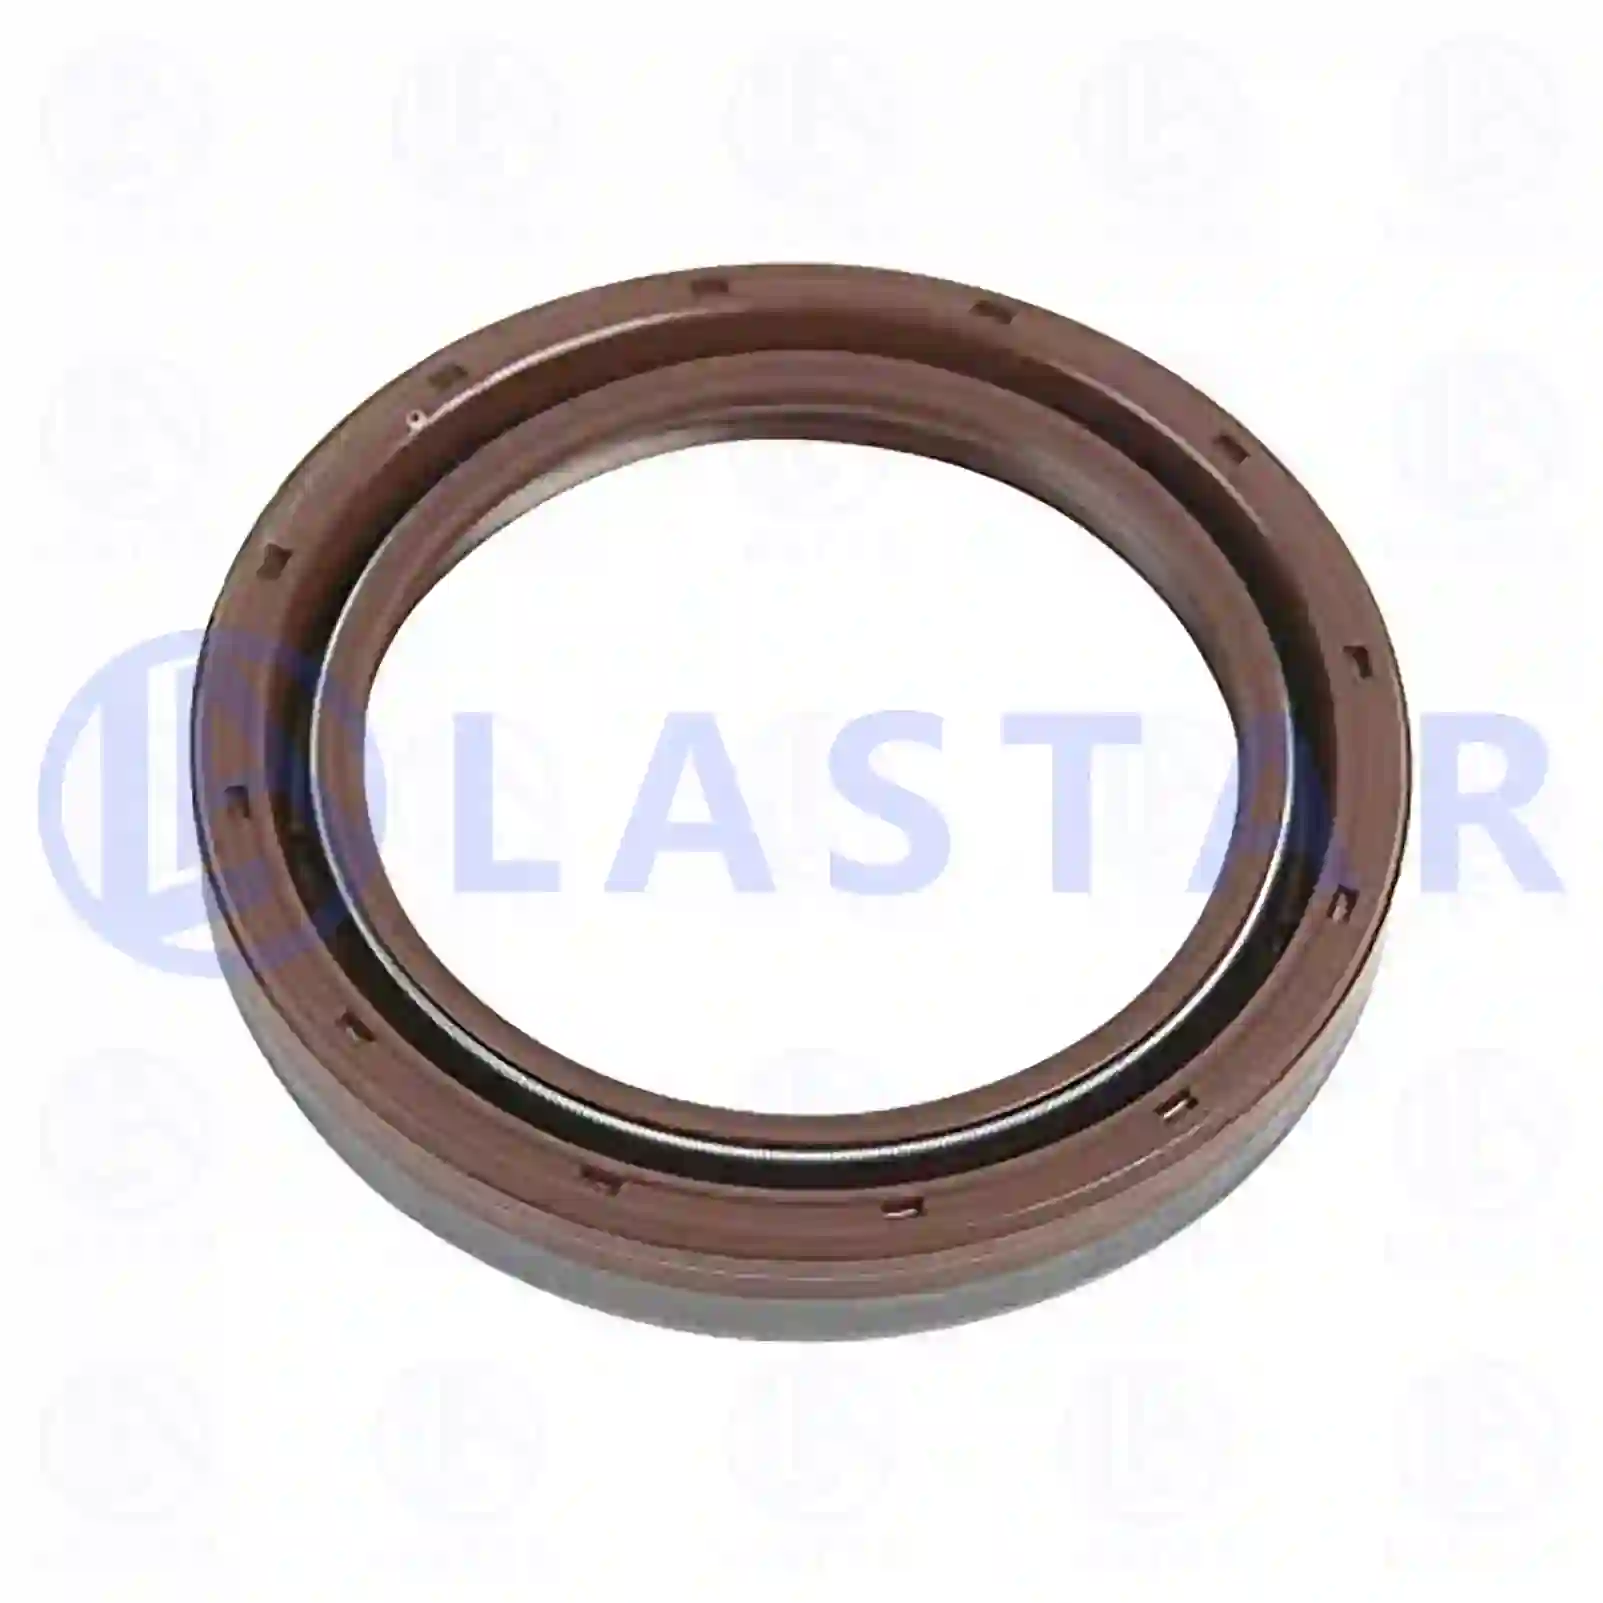 Oil seal, 77733196, 40101843, 40101840, 40101940, ||  77733196 Lastar Spare Part | Truck Spare Parts, Auotomotive Spare Parts Oil seal, 77733196, 40101843, 40101840, 40101940, ||  77733196 Lastar Spare Part | Truck Spare Parts, Auotomotive Spare Parts